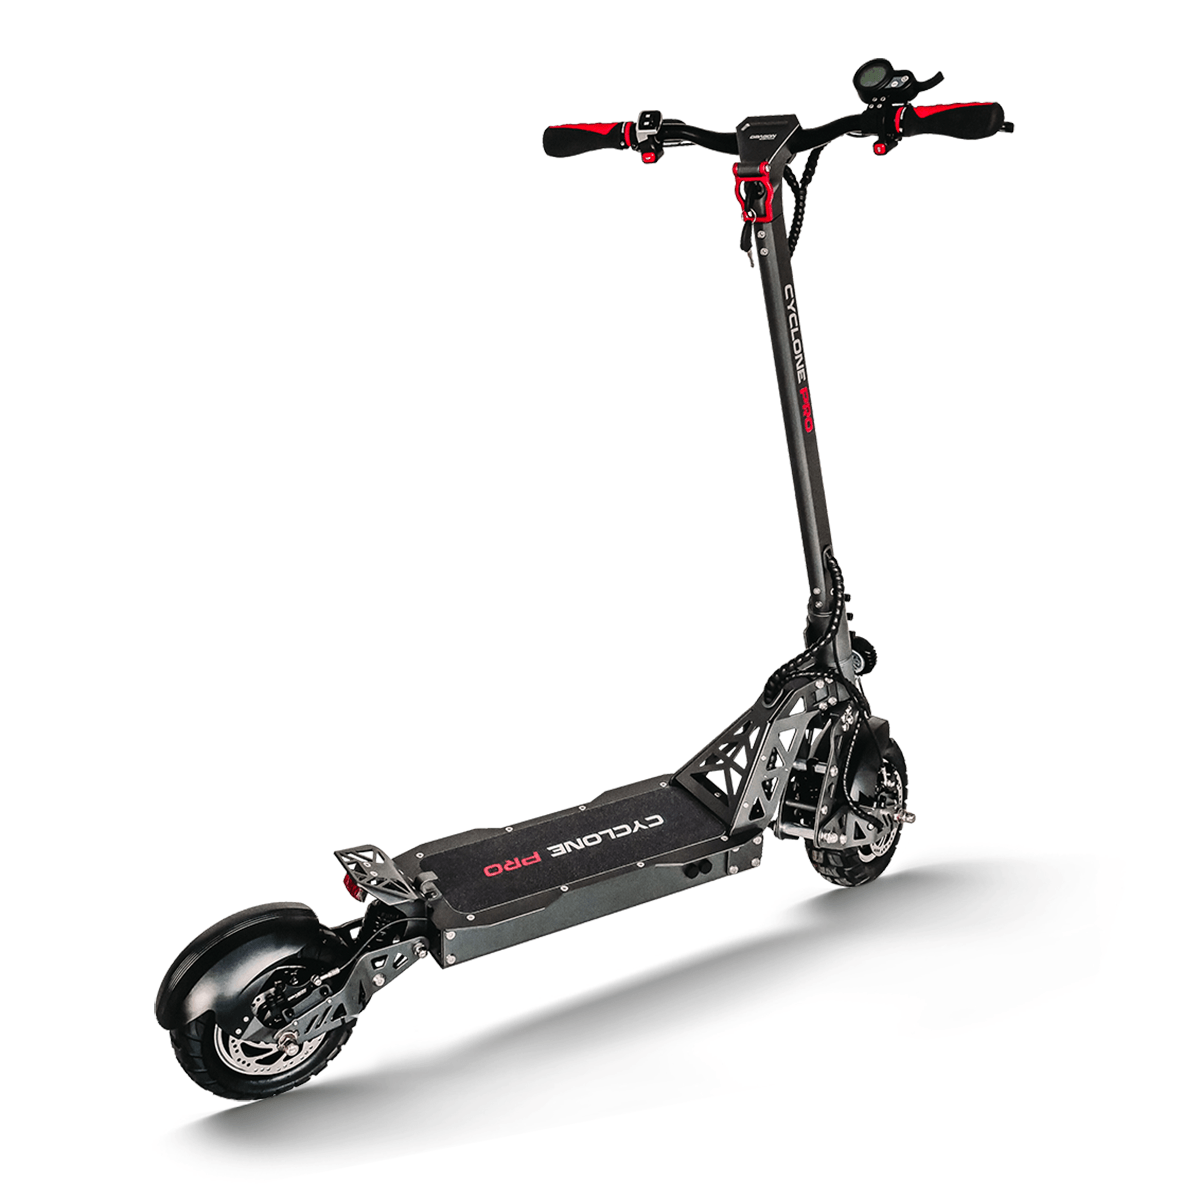 CYCLONE PRO - DUAL MOTOR - All-Terrain Electric Scooter 2000 watts Max 3600 watts - Bike Scooter City